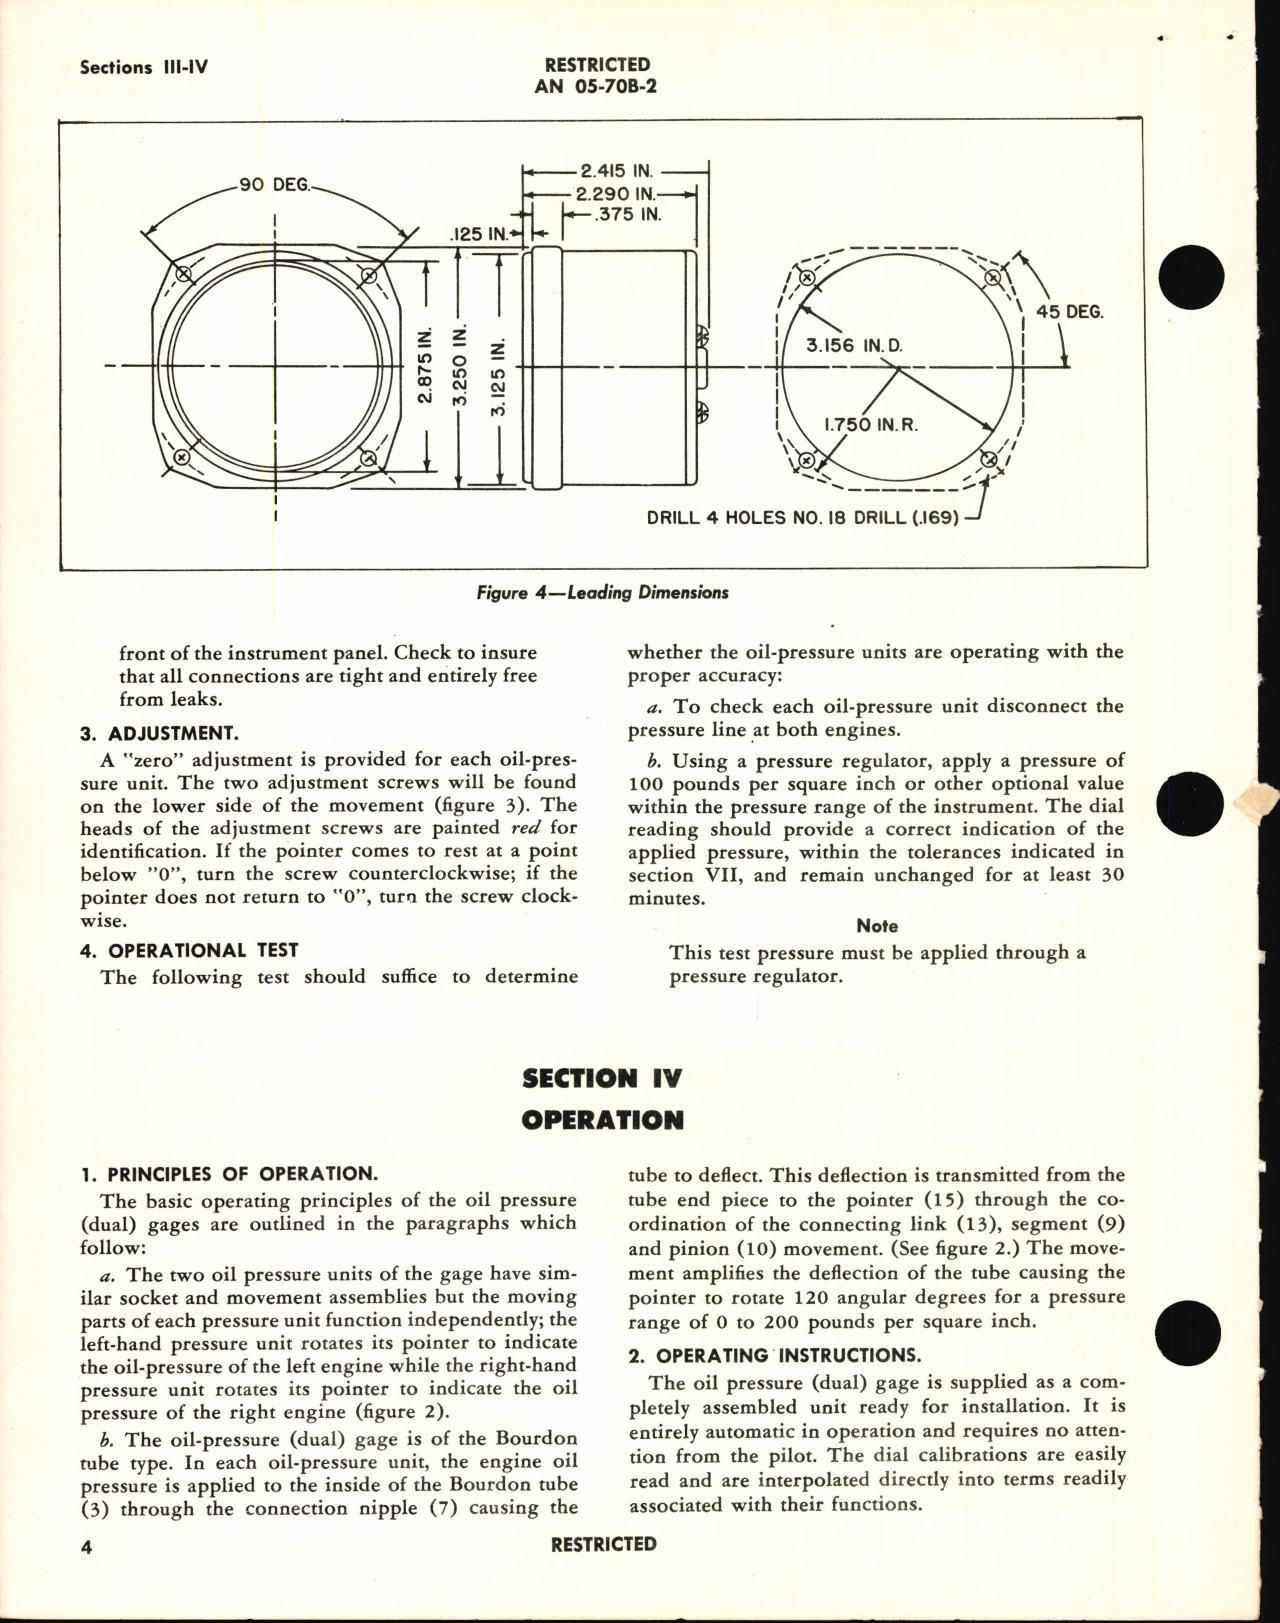 Sample page 8 from AirCorps Library document: Operation, Service, & Overhaul Instructions with Parts Catalog for Dual Oil Pressure Gages